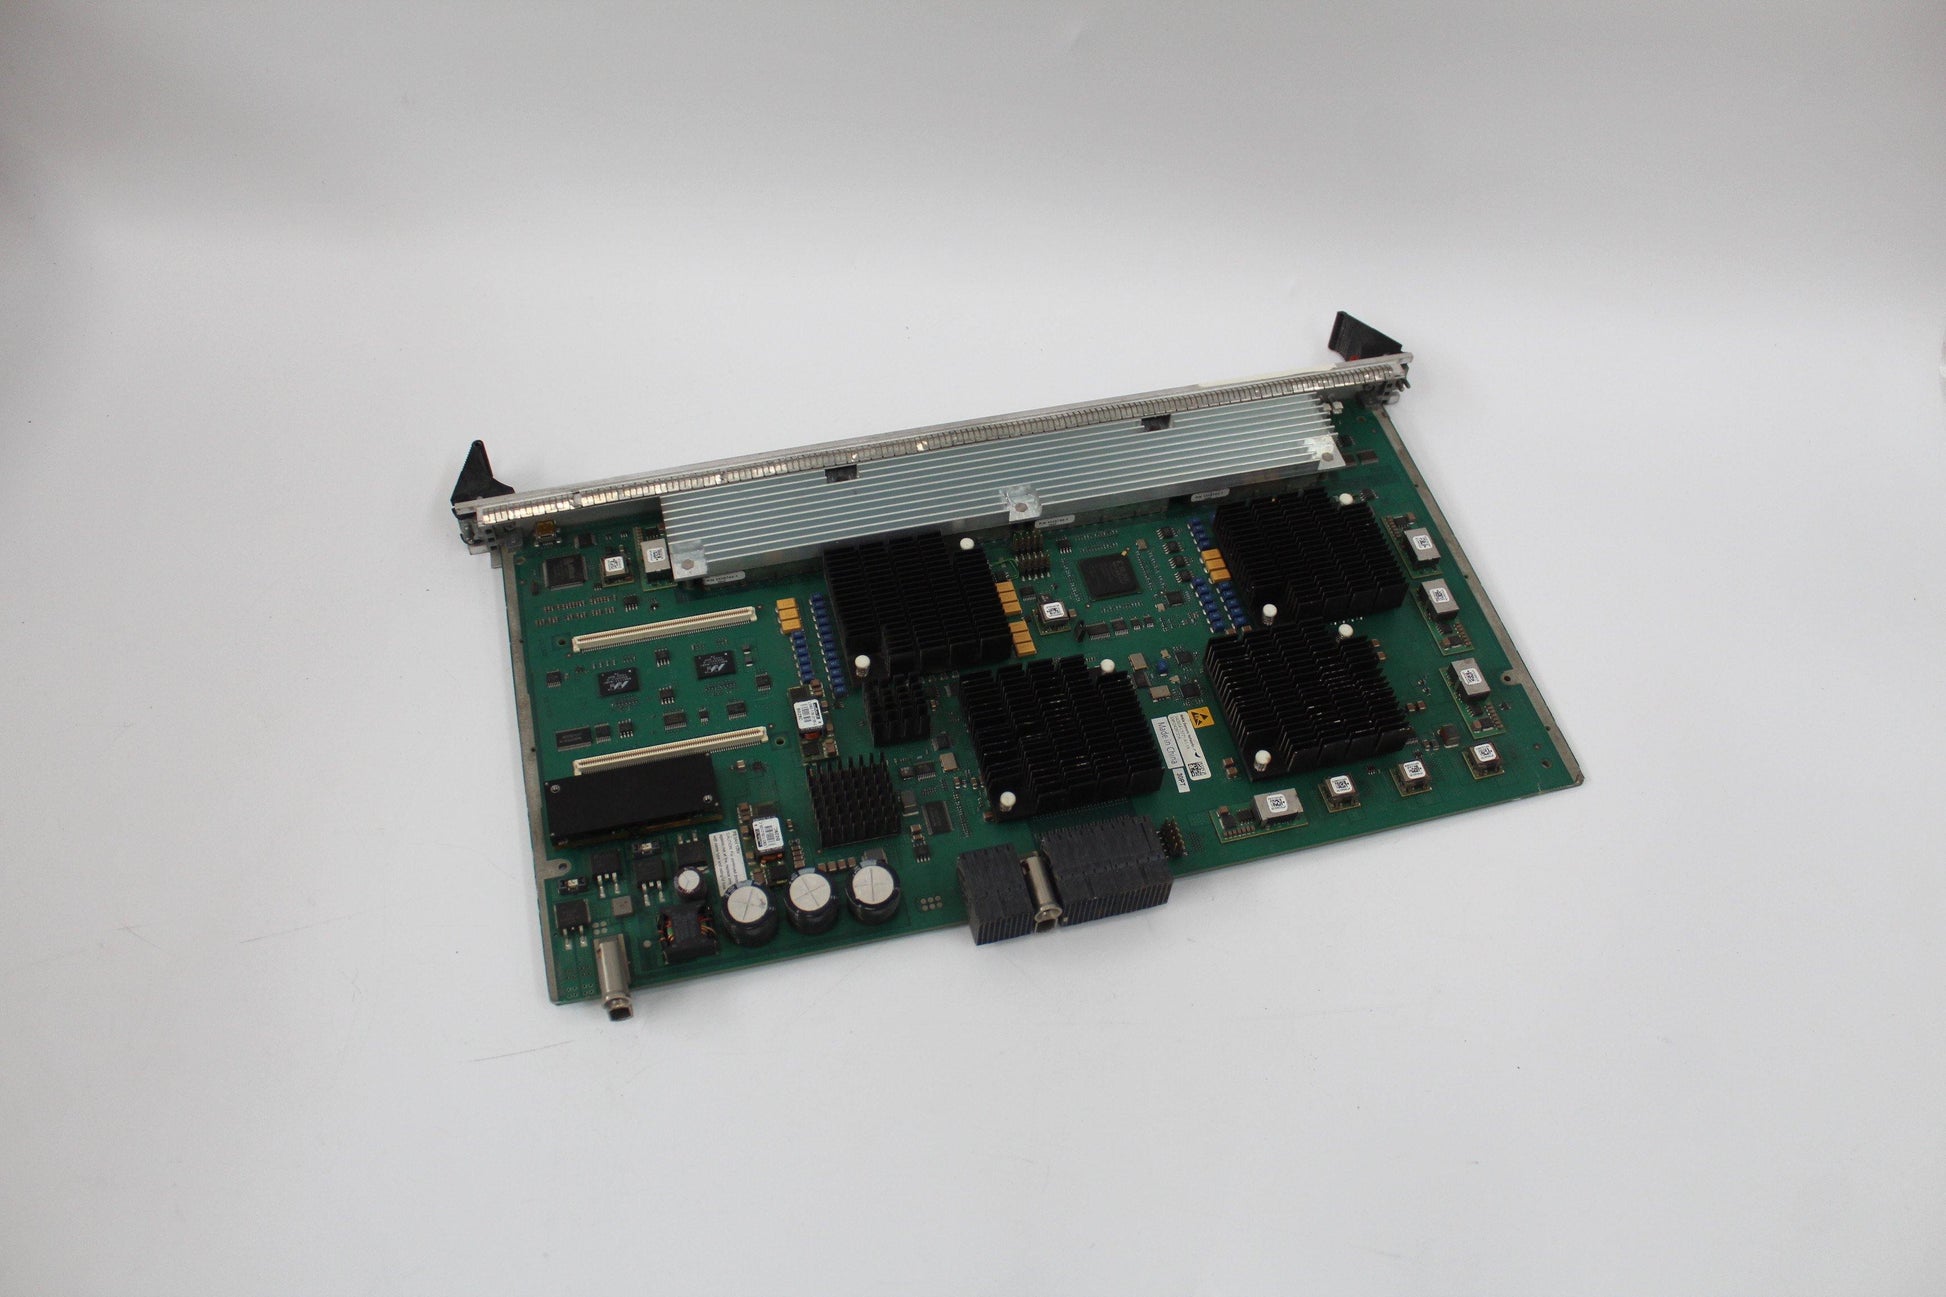 Used Nokia & Siemens Network Communication Board S42024-L5721-A100-1A - we